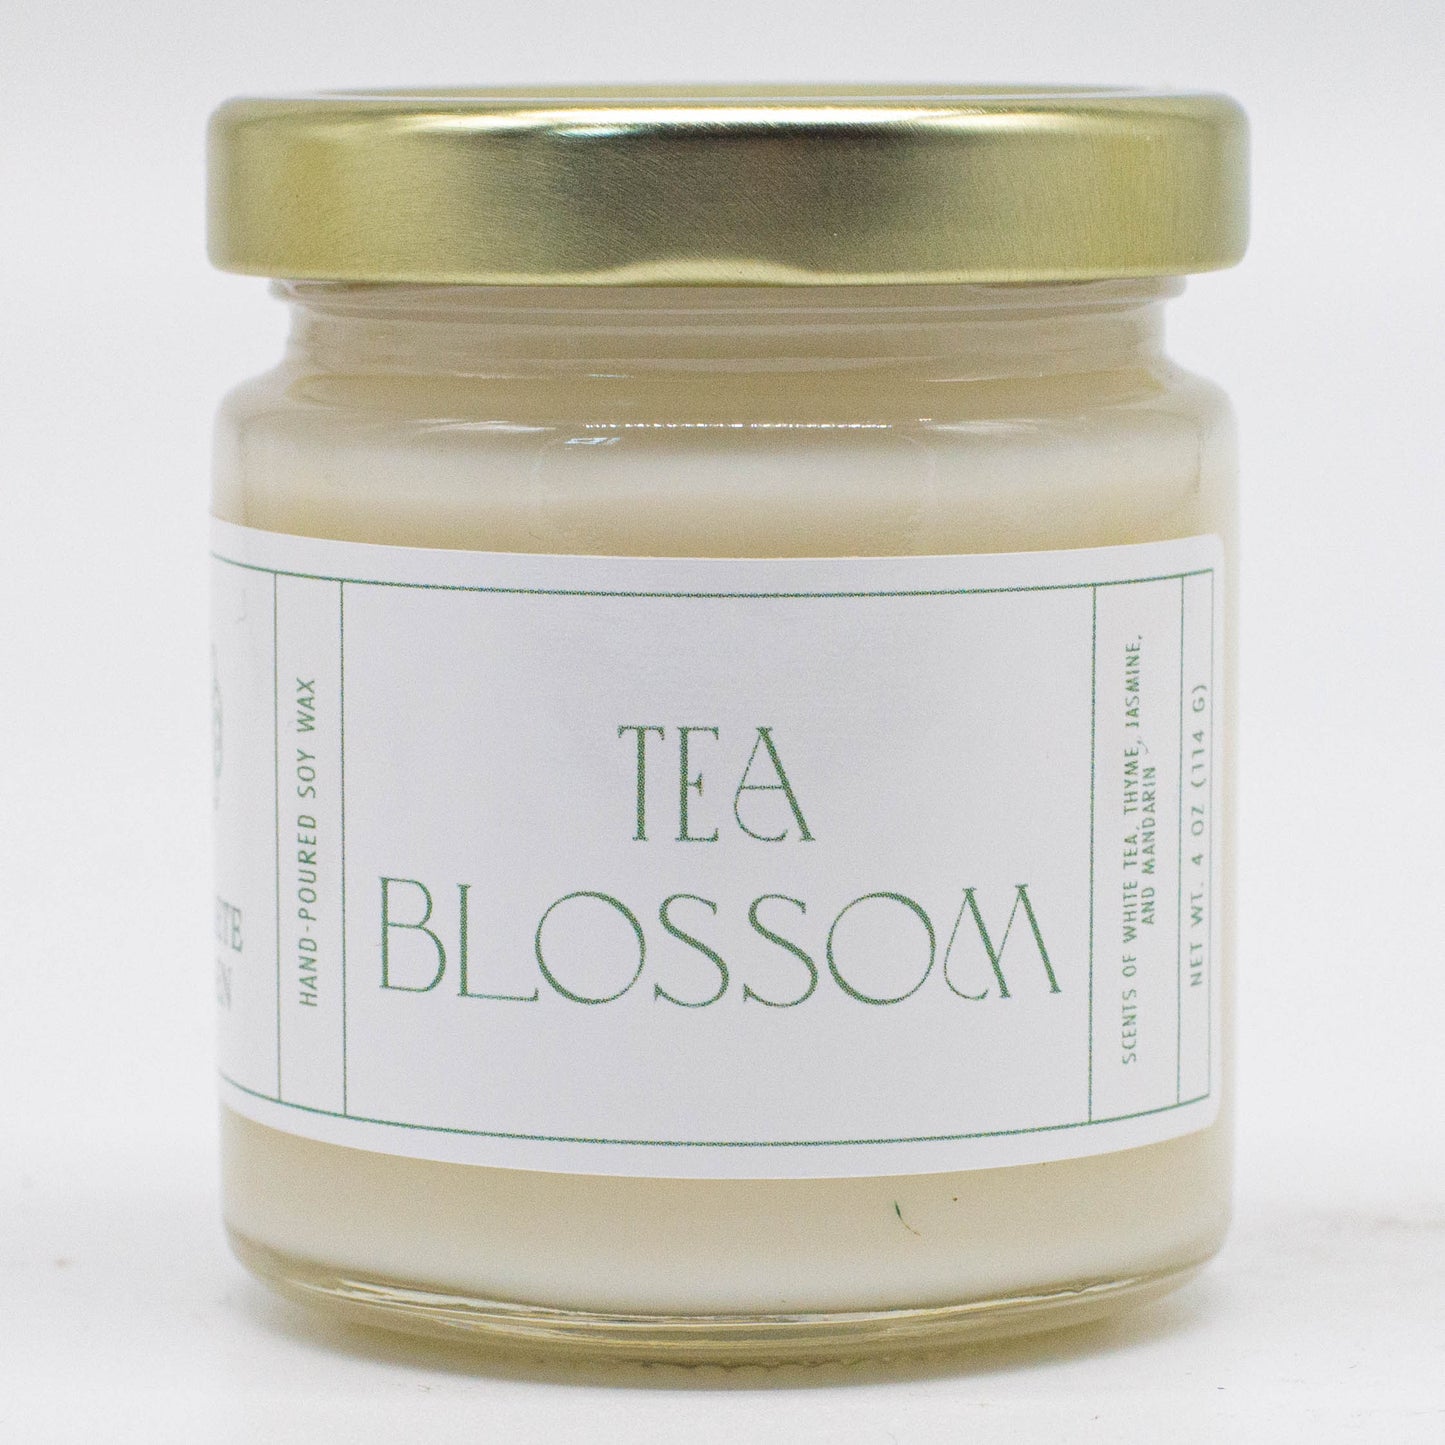 Tea Blossom, White Tea and Thyme Soy Candle, 4 oz